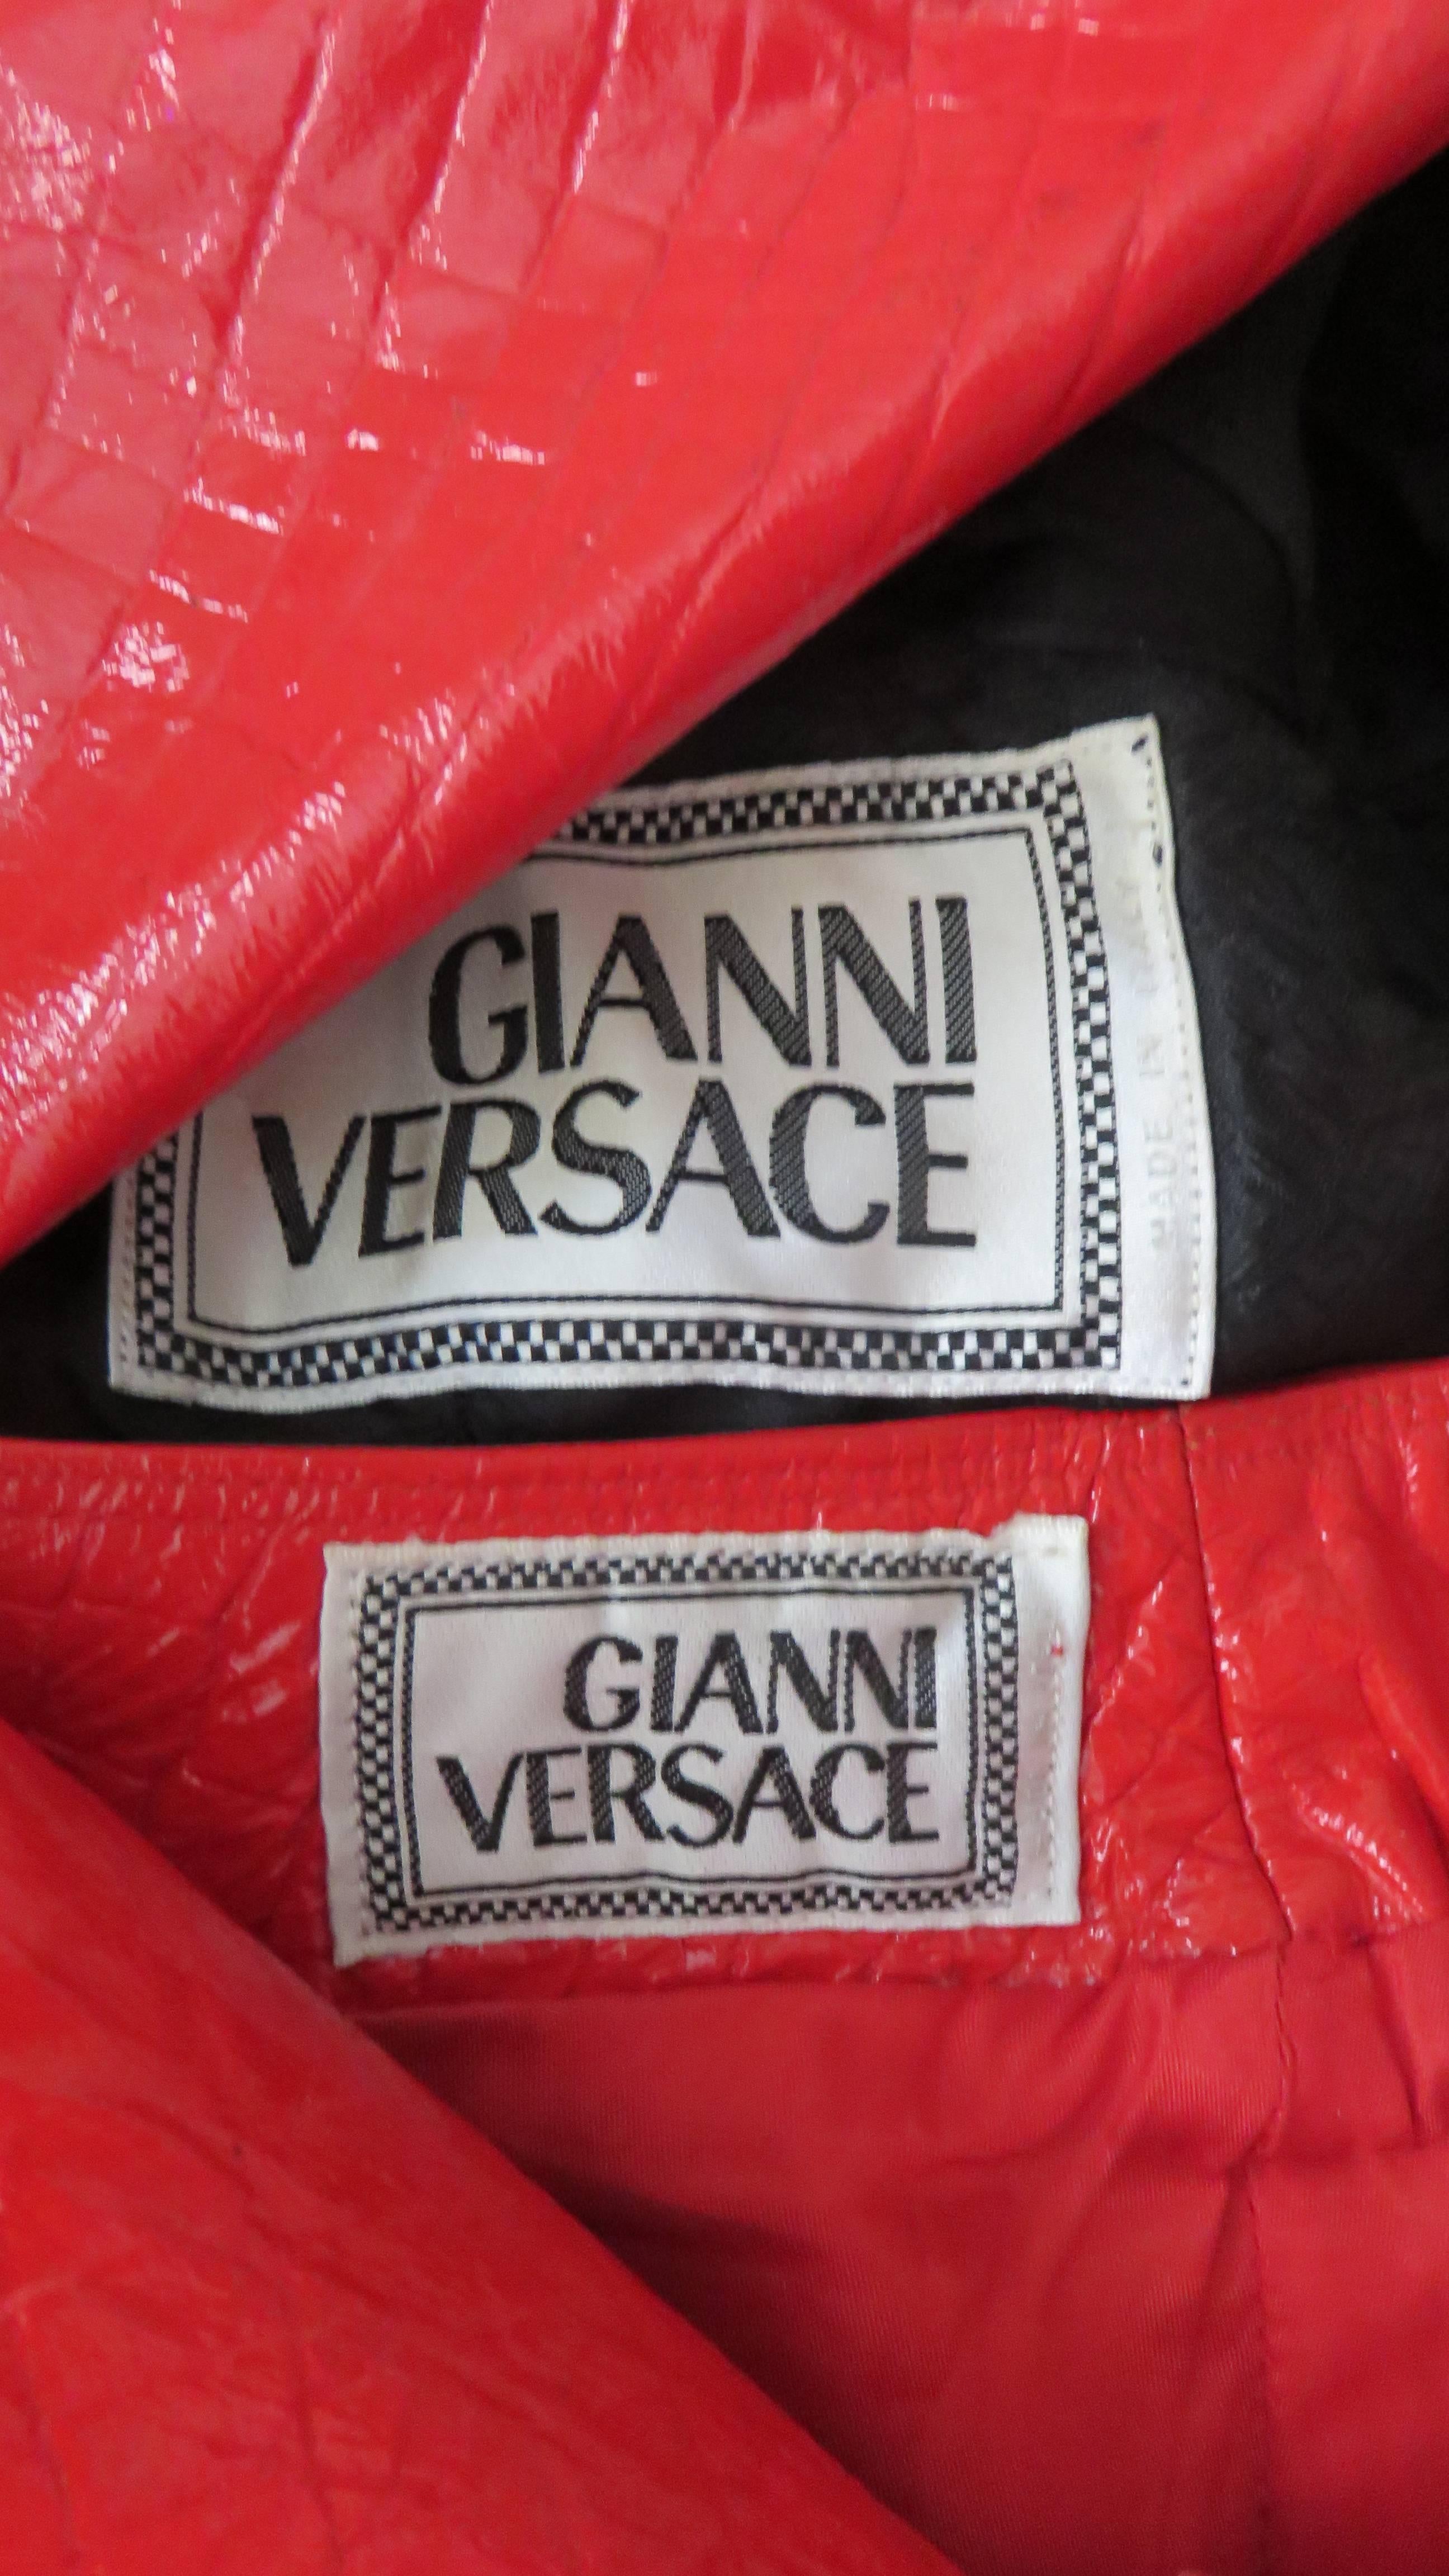 Gianni Versace Red Leather Motorcycle Jacket and Skirt A/W 1994 For Sale 8